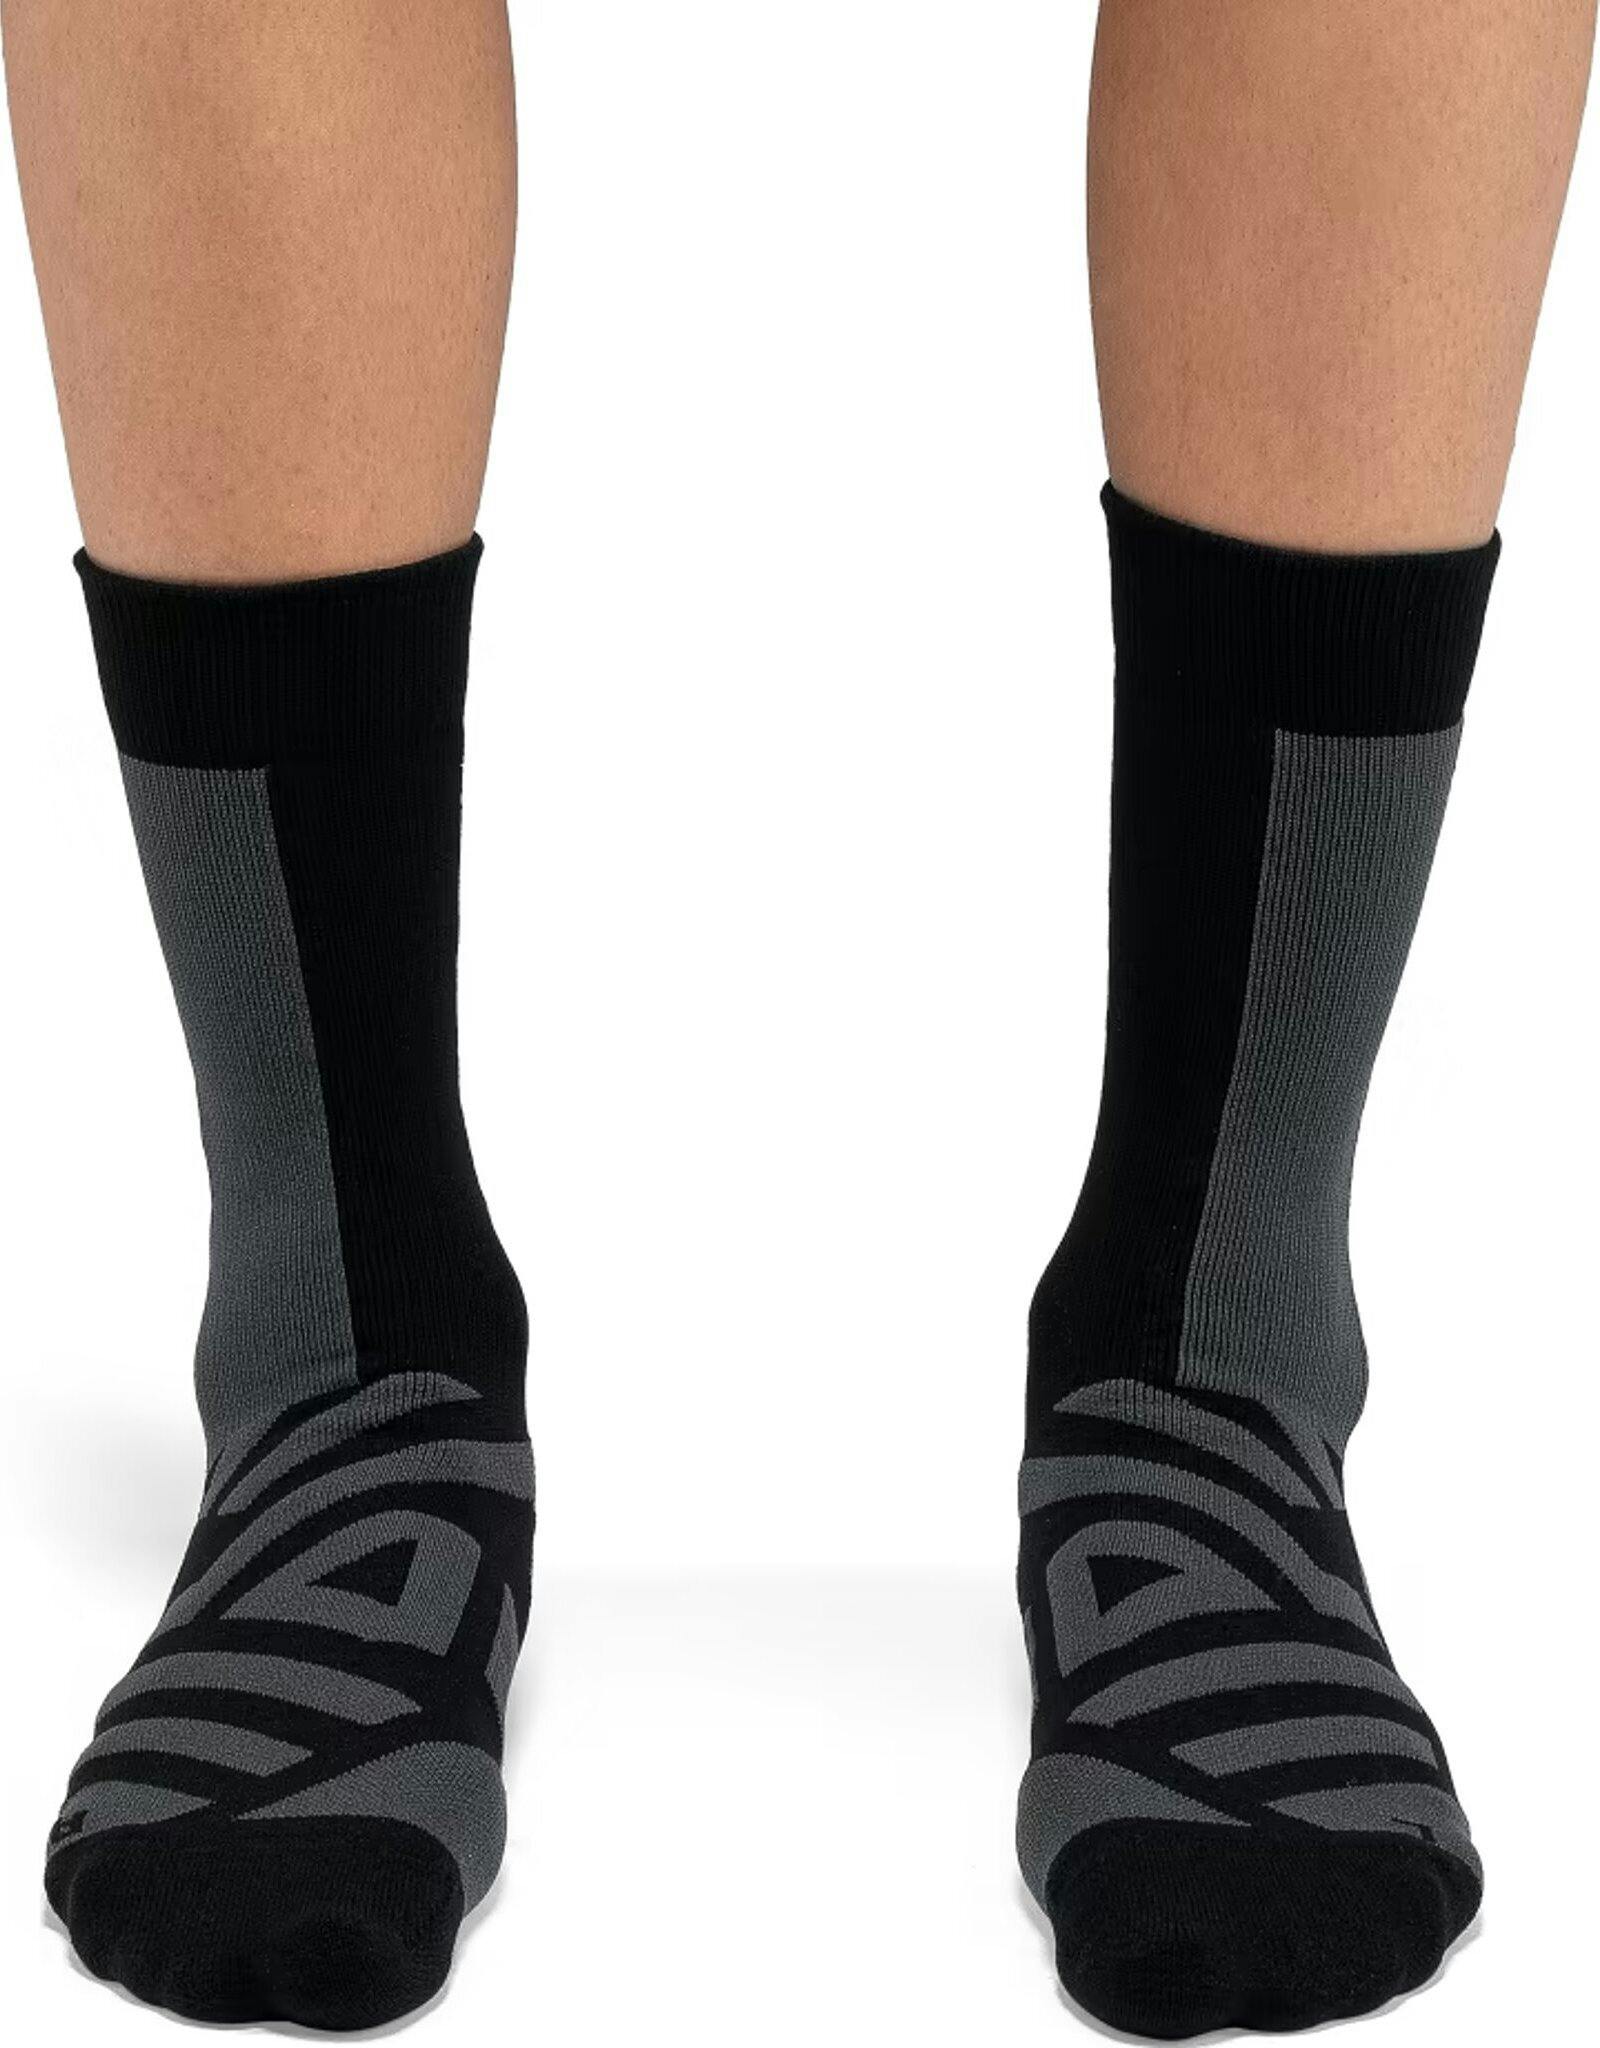 Product image for Performance High Socks - Women's